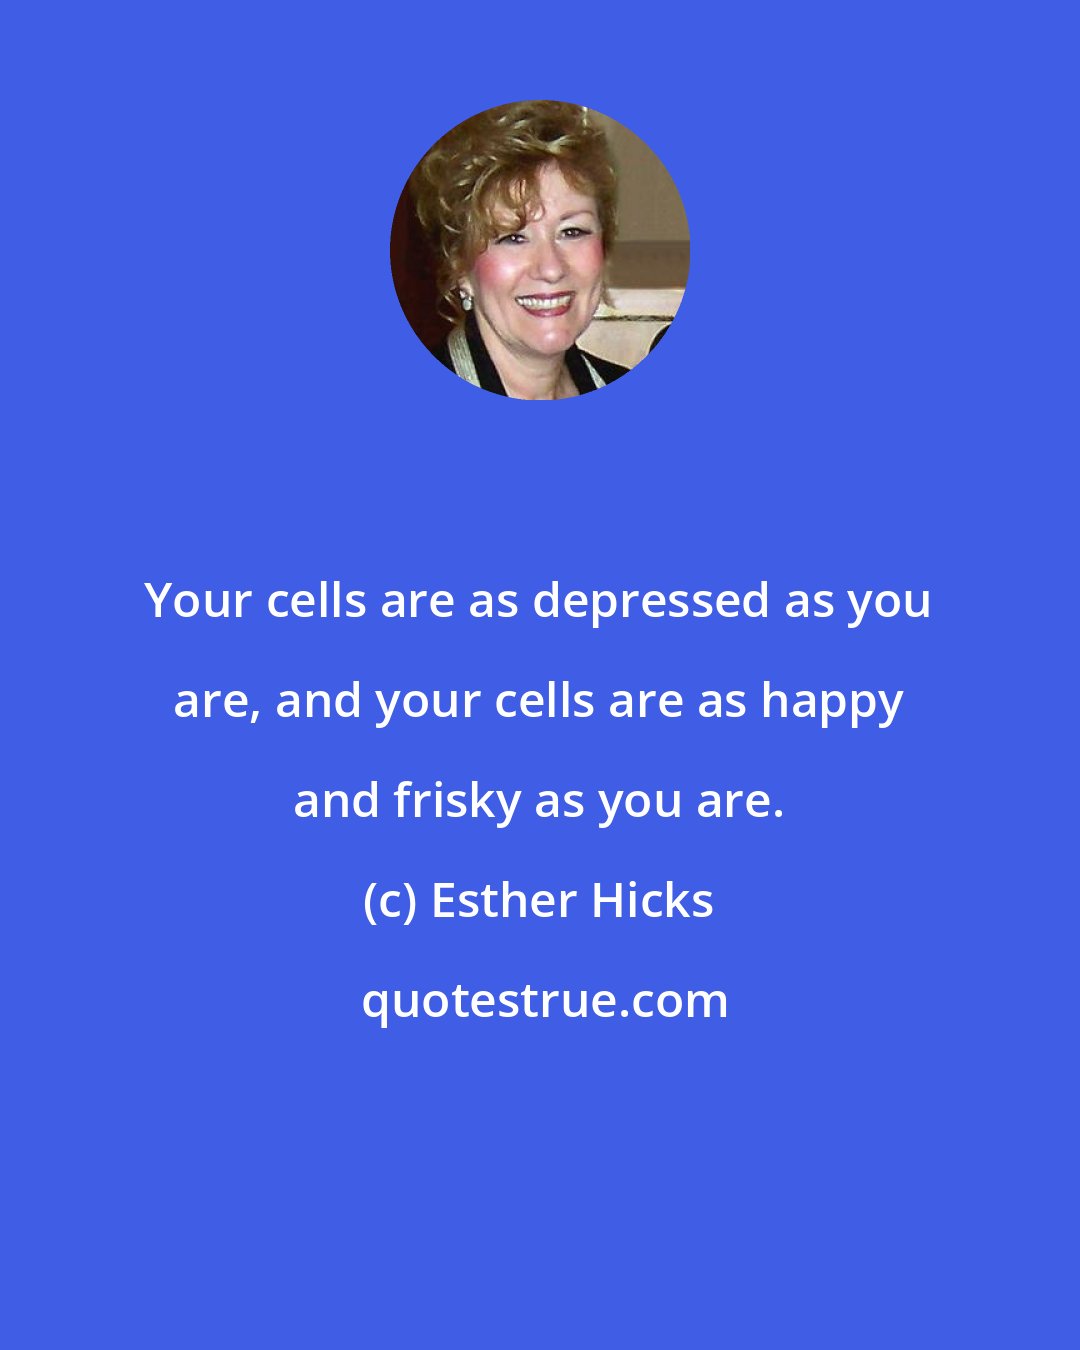 Esther Hicks: Your cells are as depressed as you are, and your cells are as happy and frisky as you are.